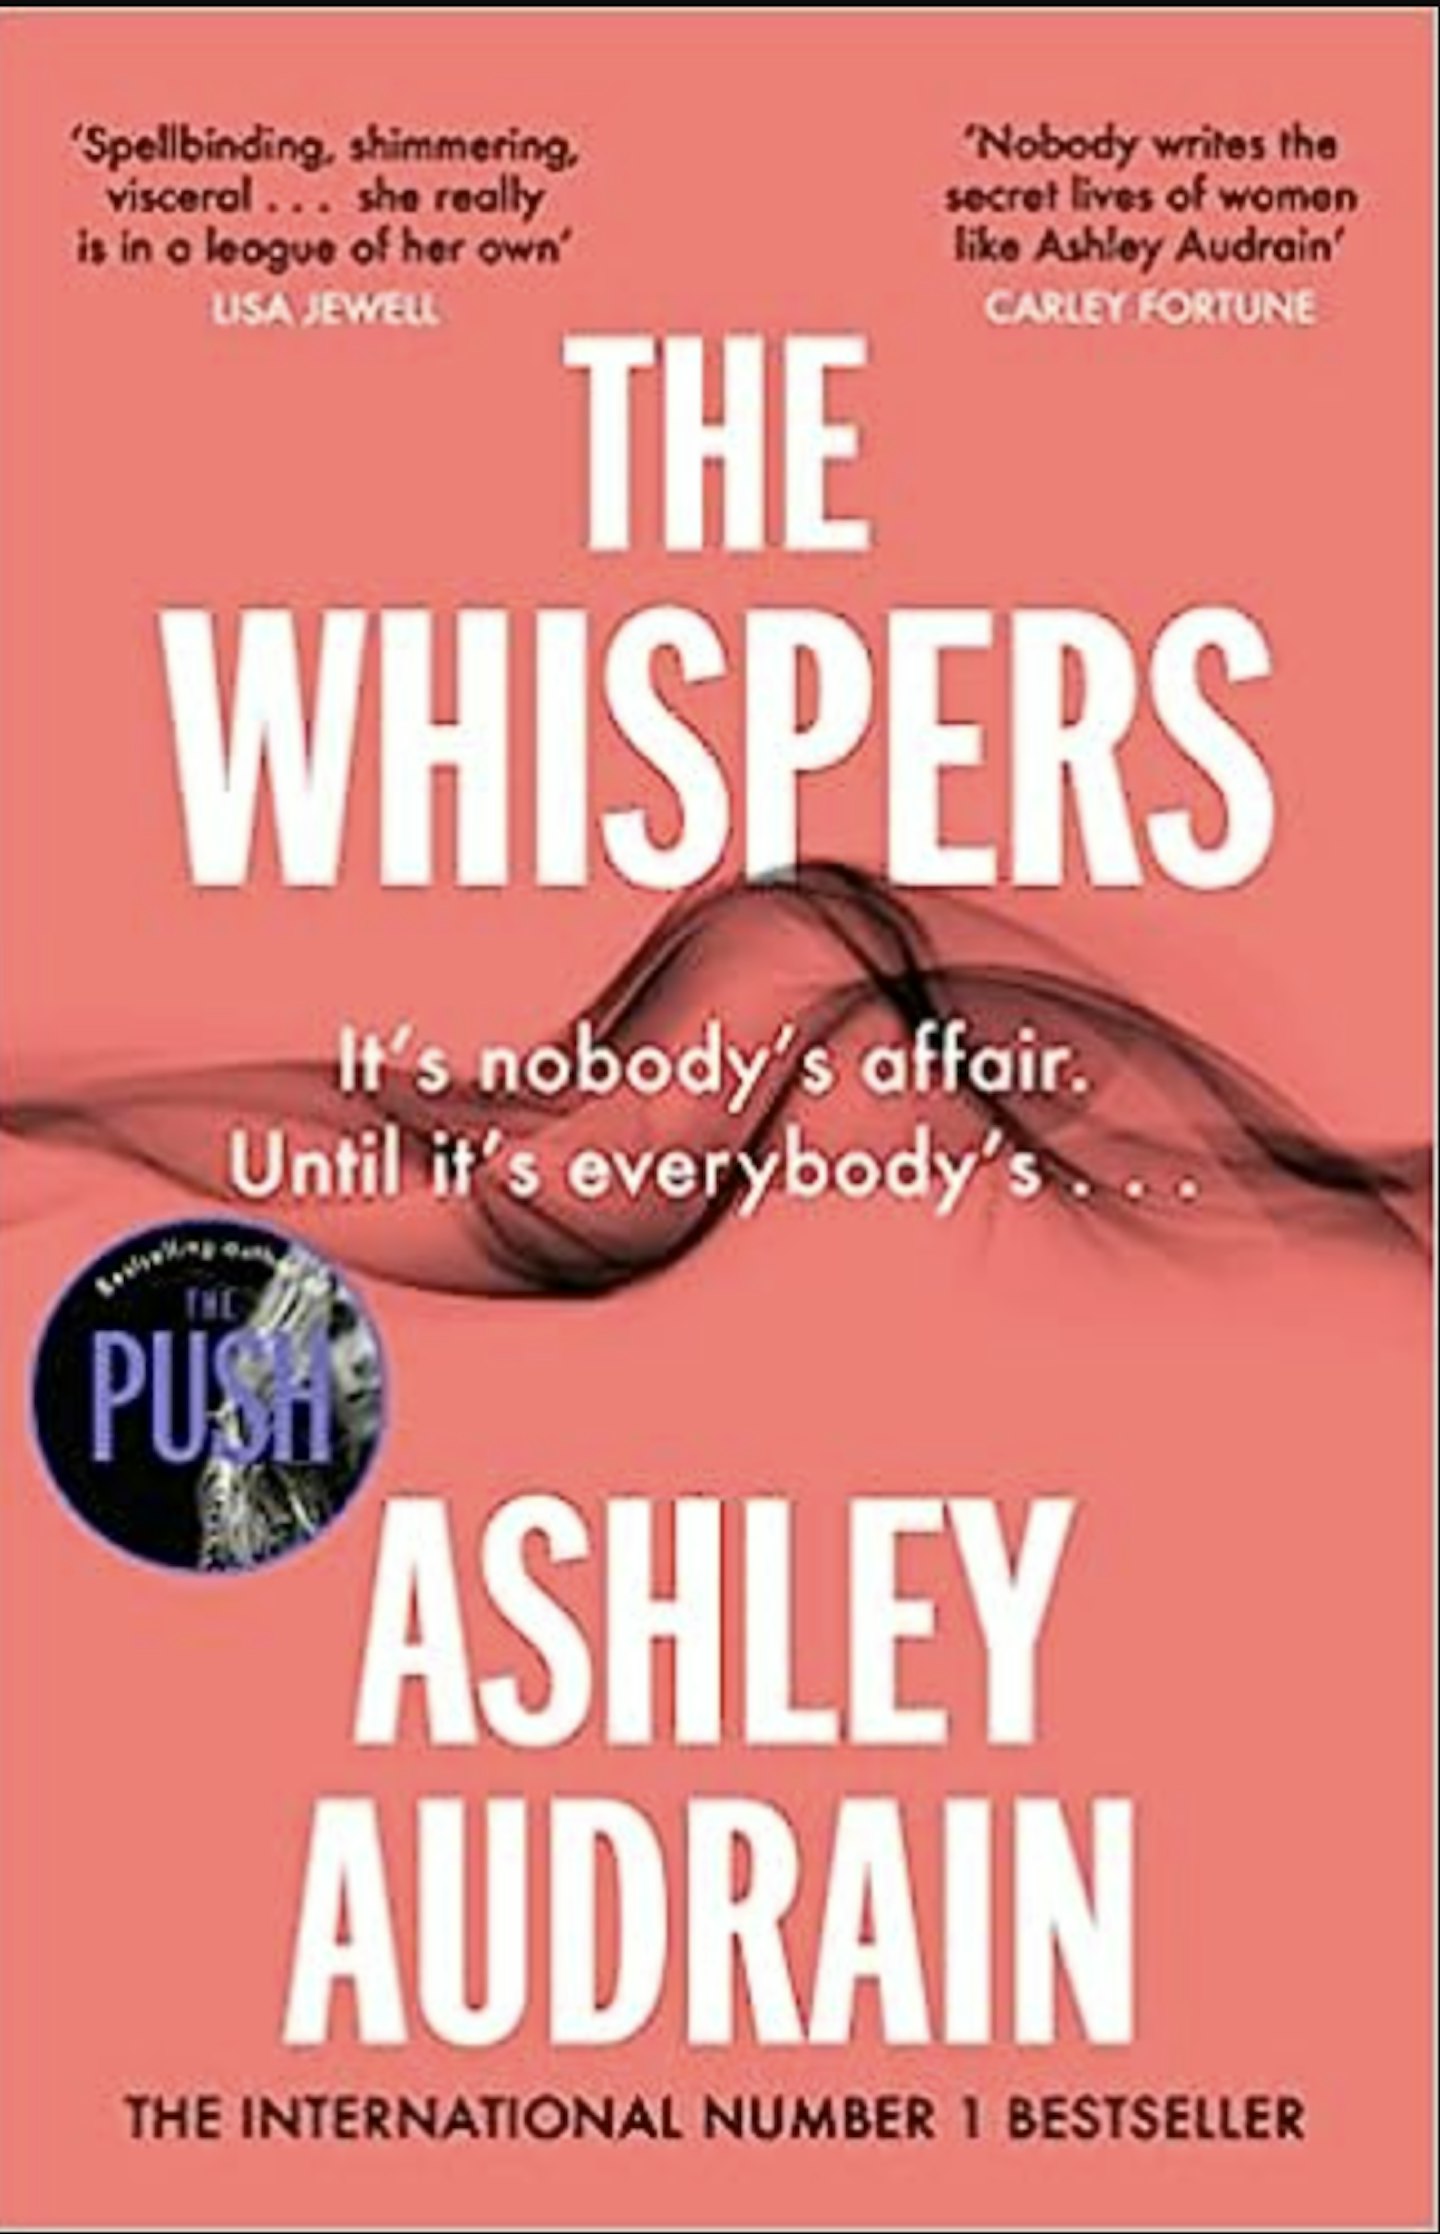 ashley audrain book the whispers